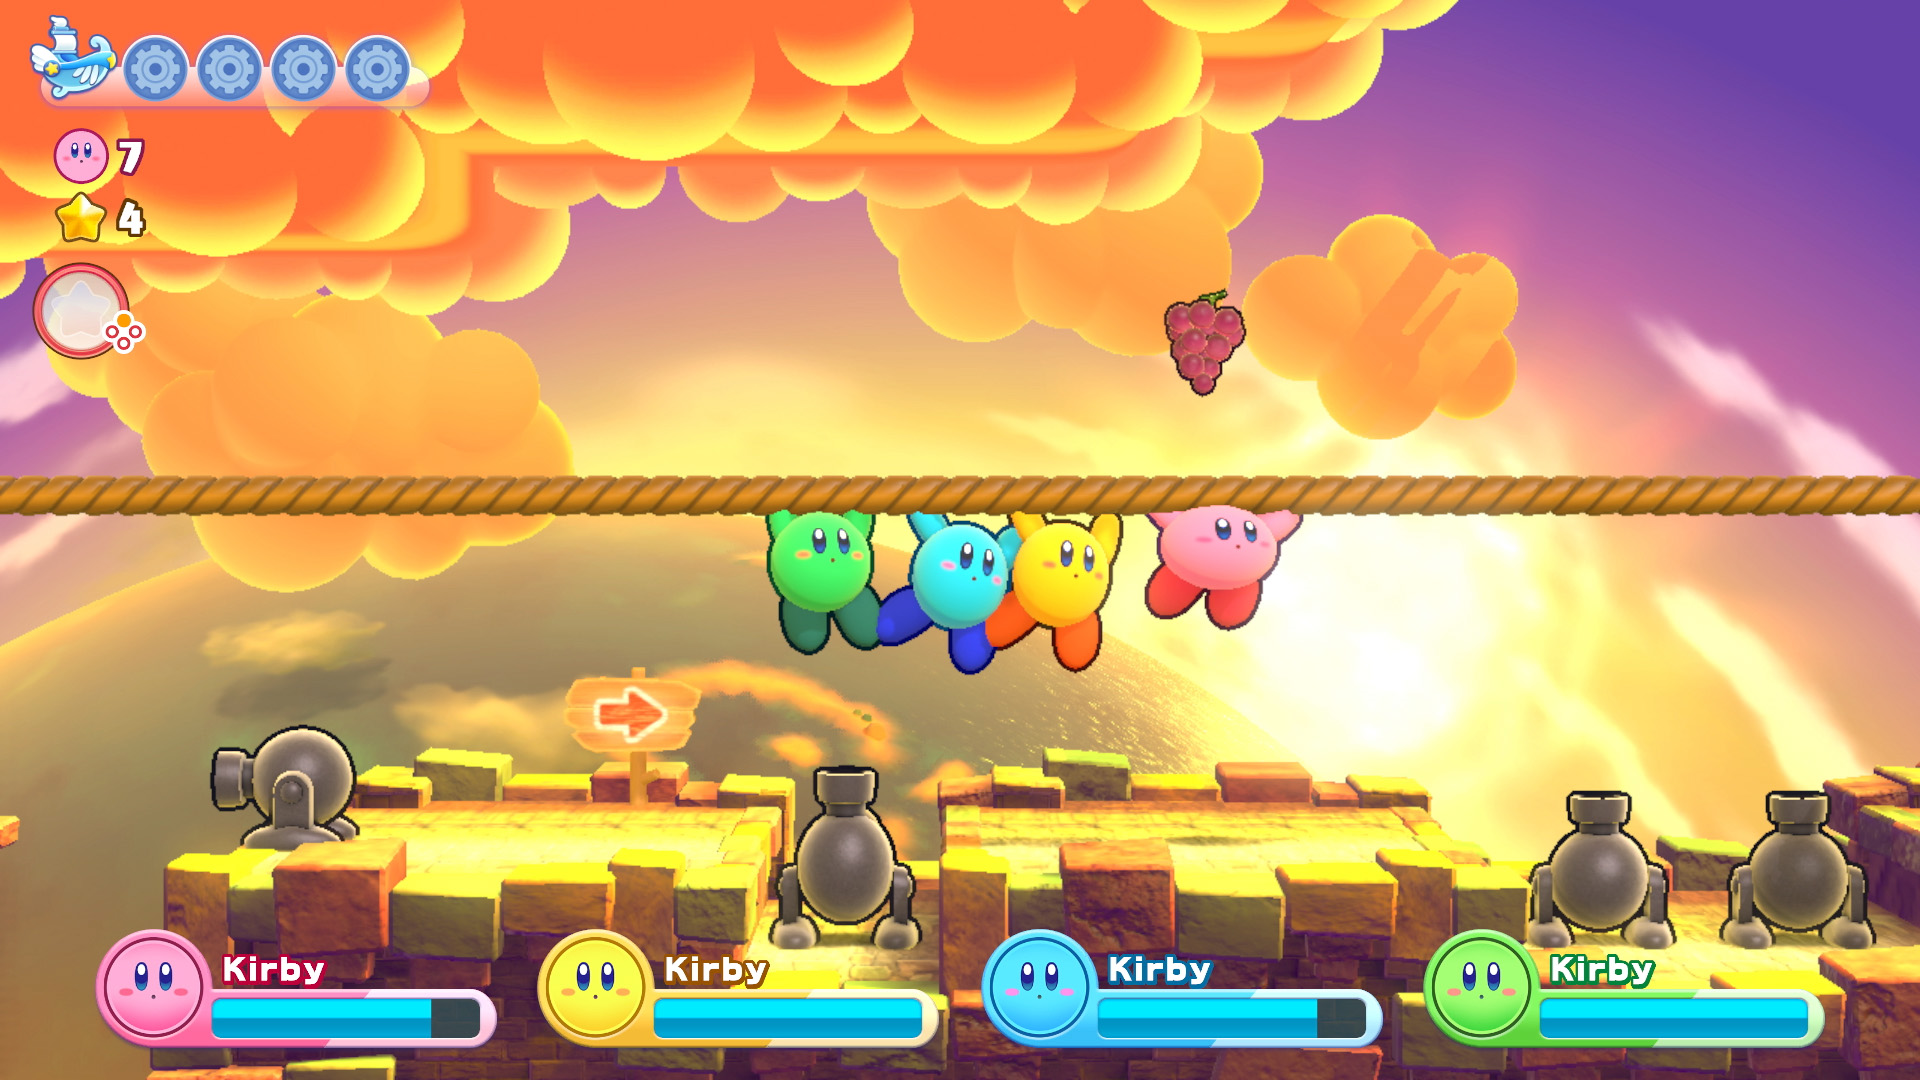 Kirby's Return to Dream Land Deluxe Nintendo Switch Account pixelpuffin.net Activation Link, $37.28